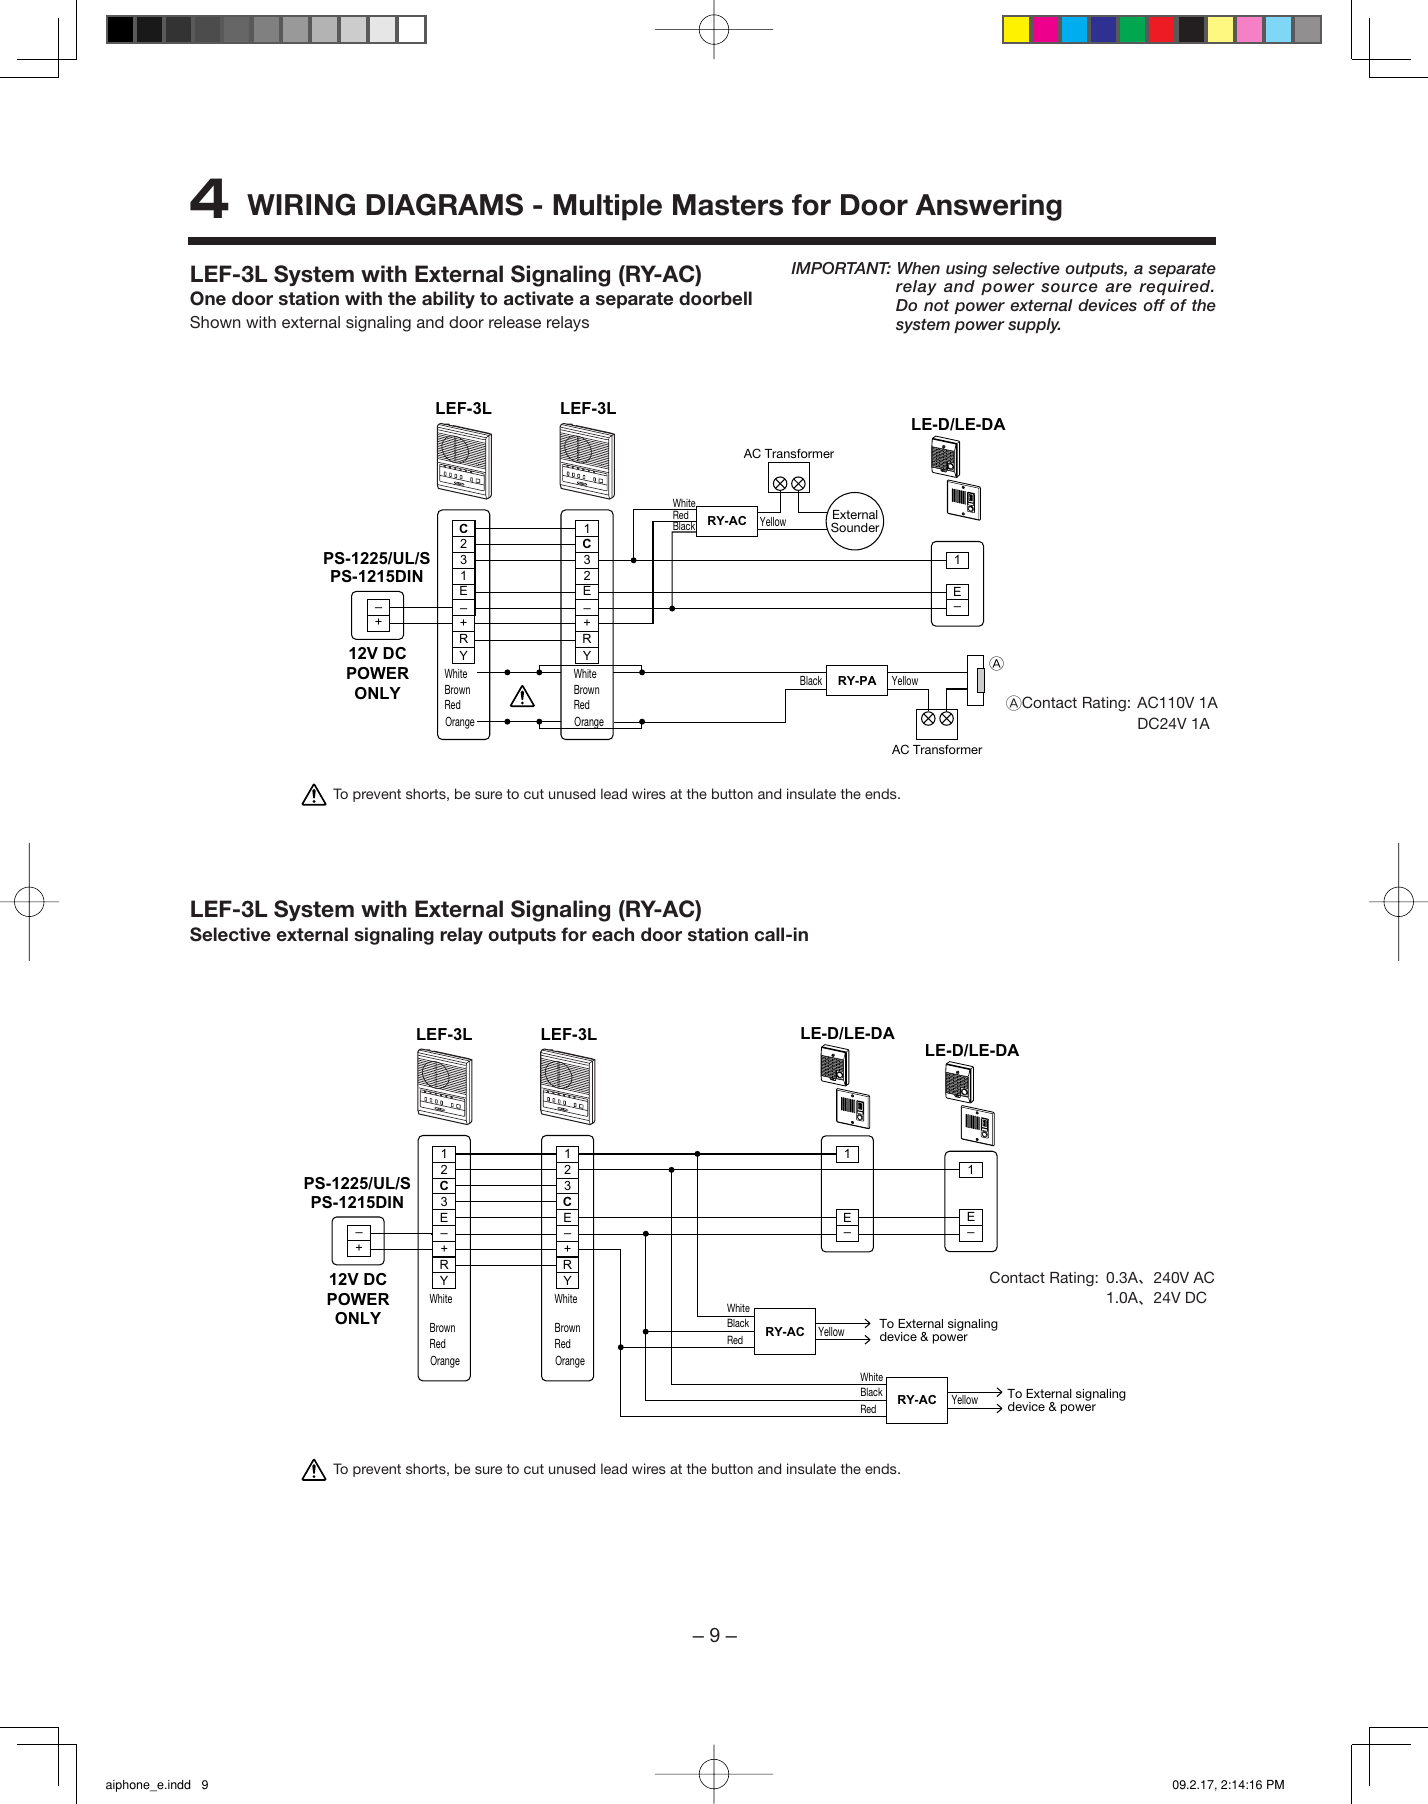 Page 9 of 12 - Aiphone Aiphone-Lef-3L-Users-Manual- Aiphone_e  Aiphone-lef-3l-users-manual